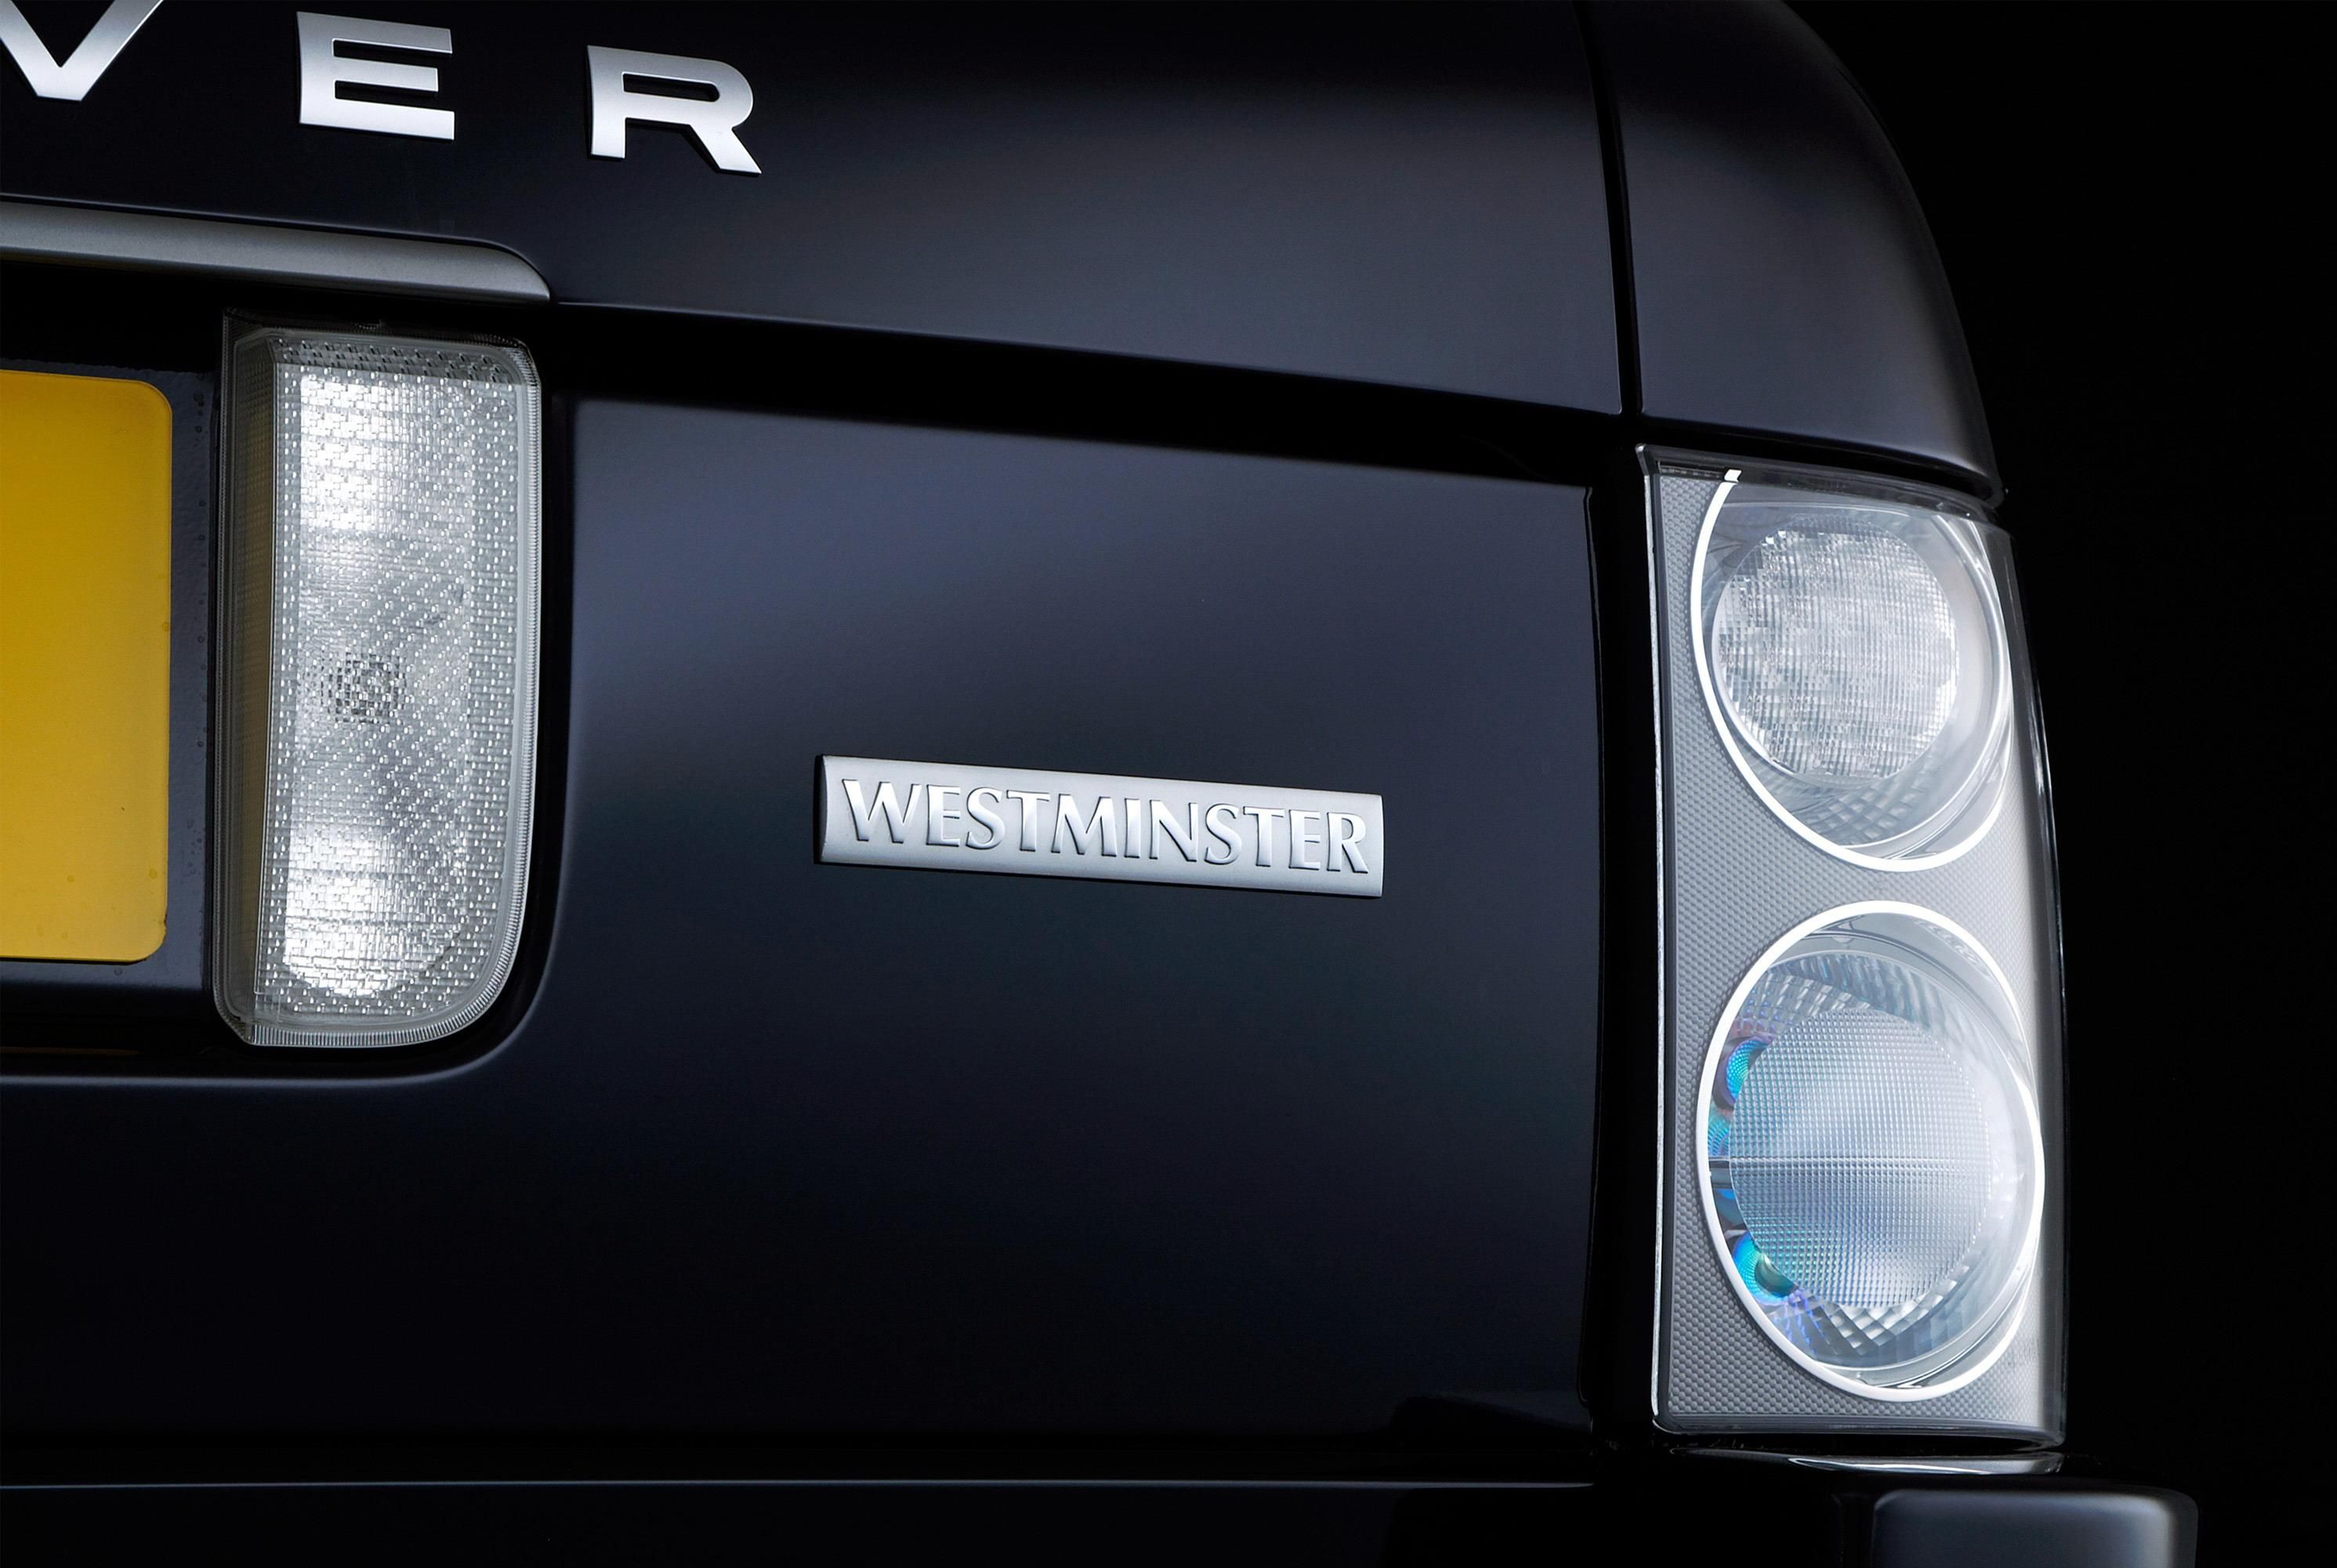 2009 Range Rover Westminster Limited Edition